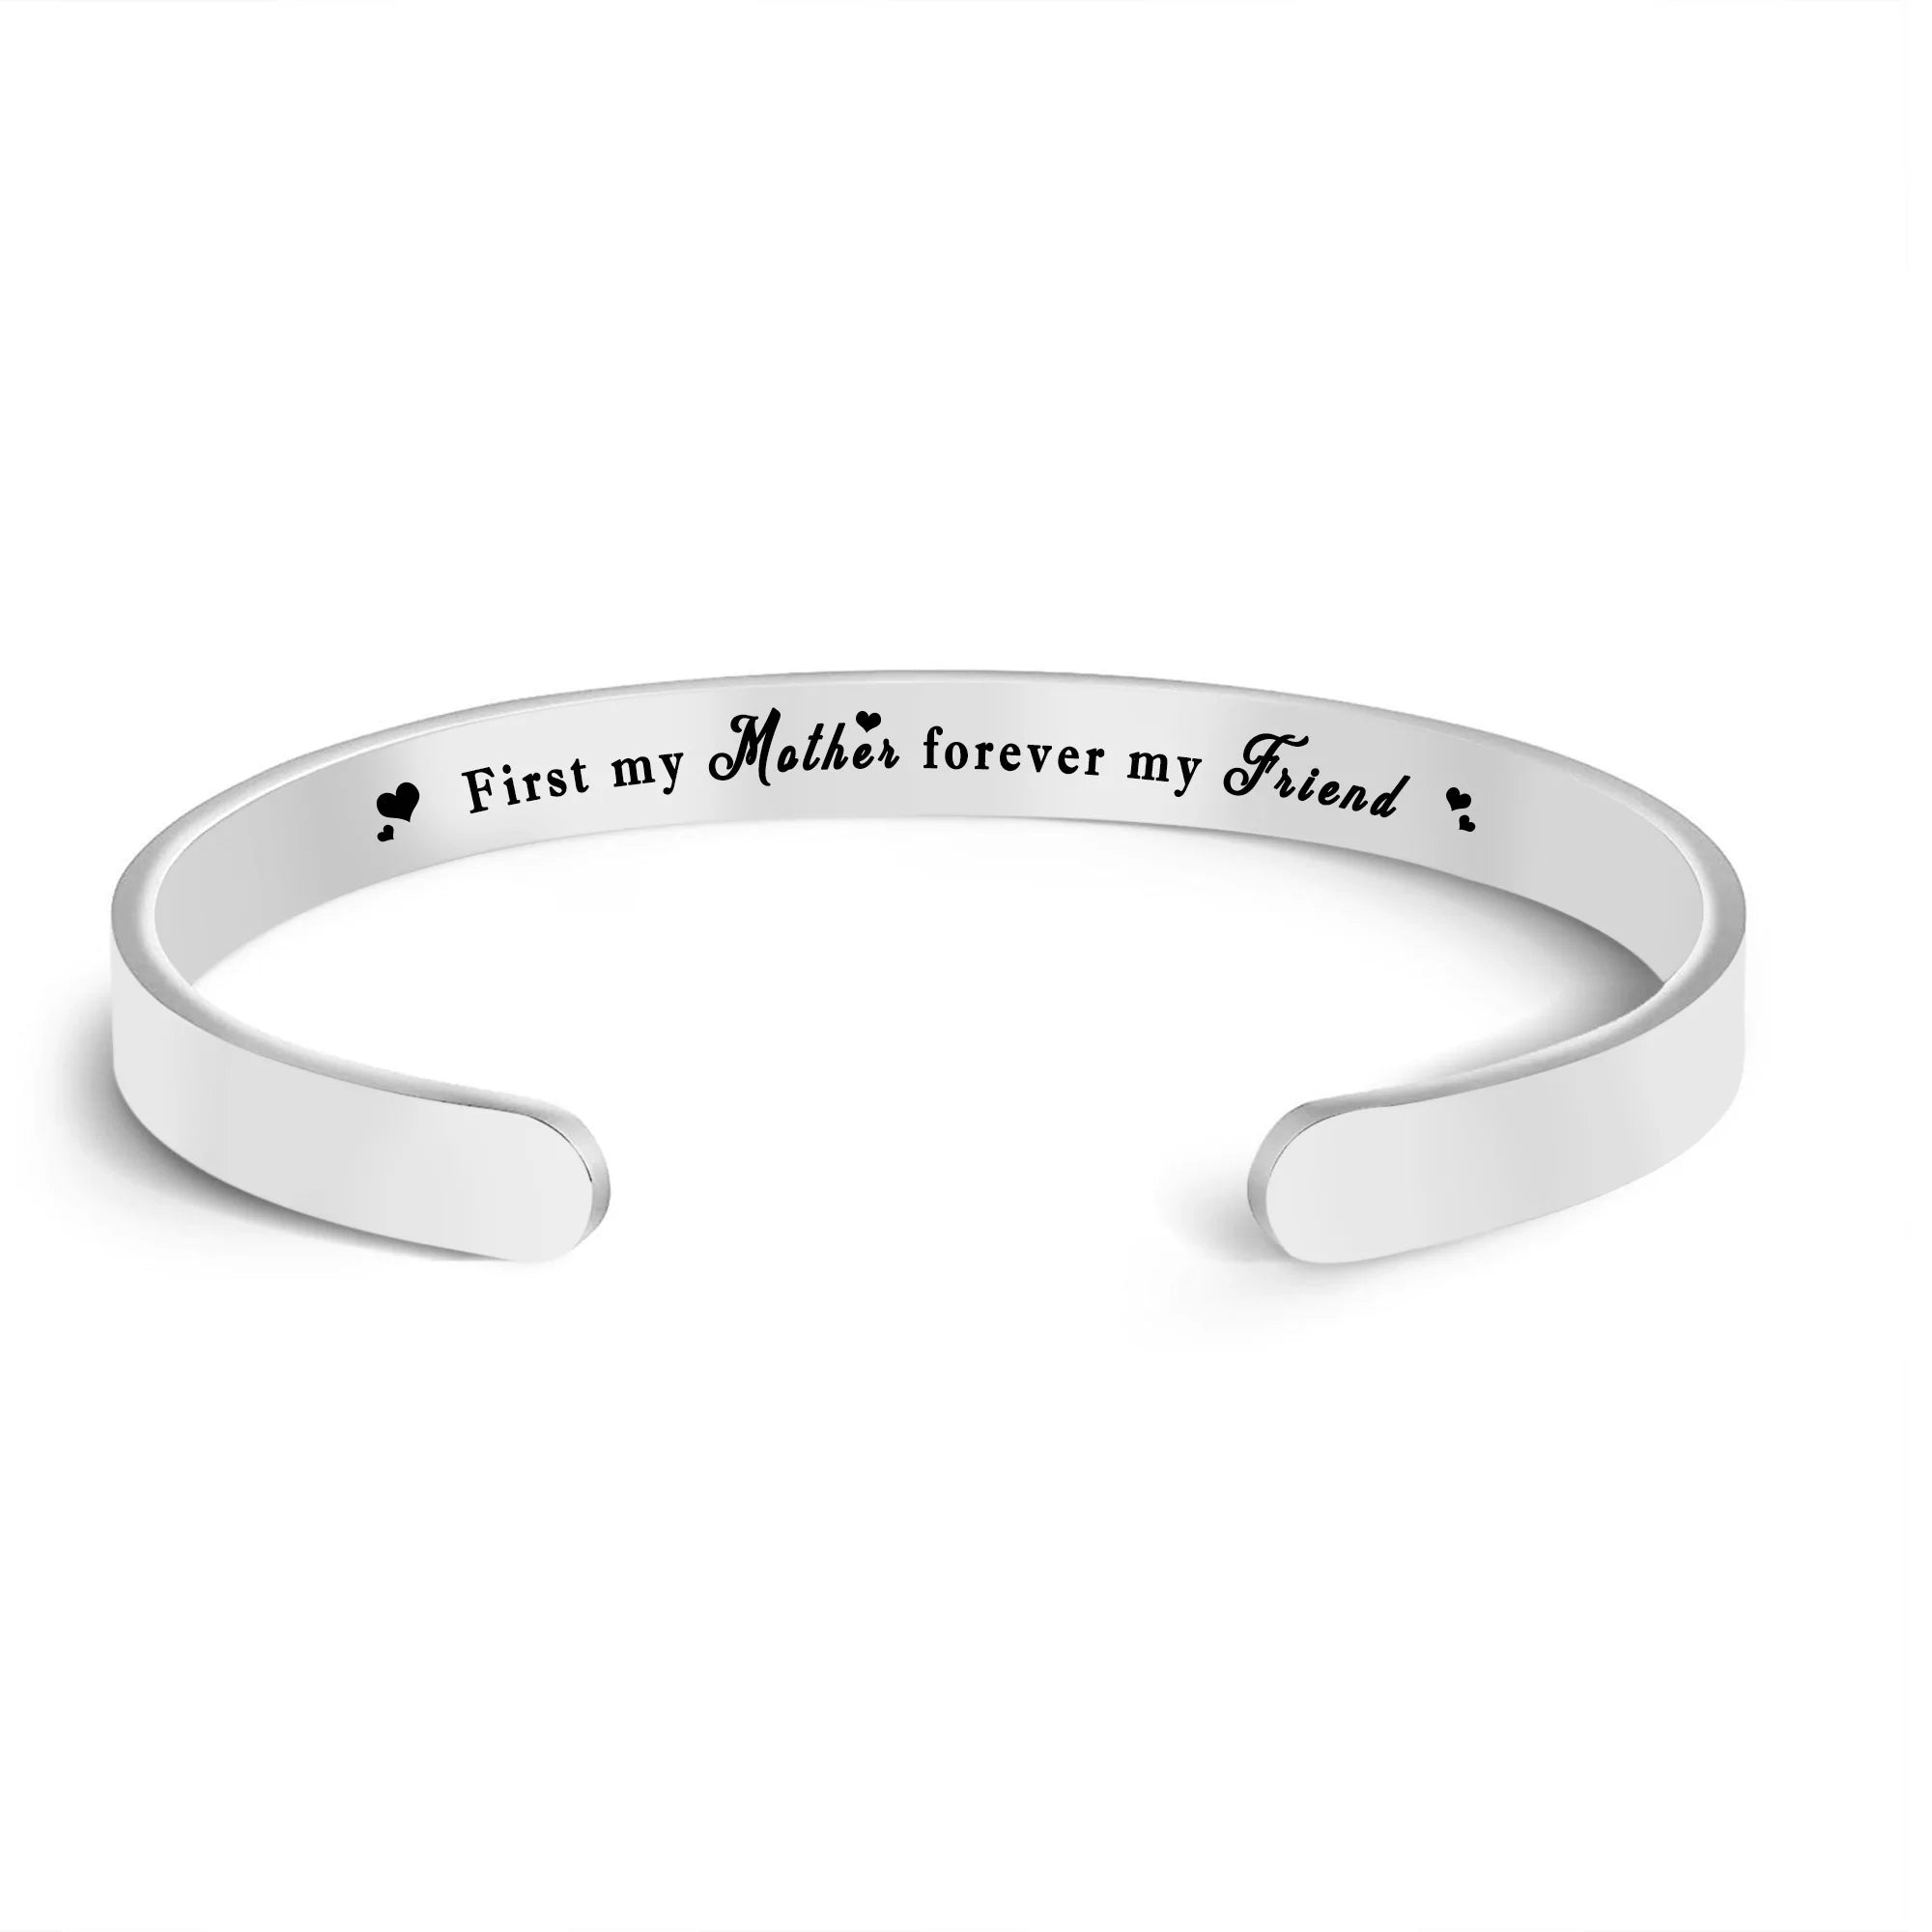 For Mother - First My Mother Forever My Friend Cuff Bracelet